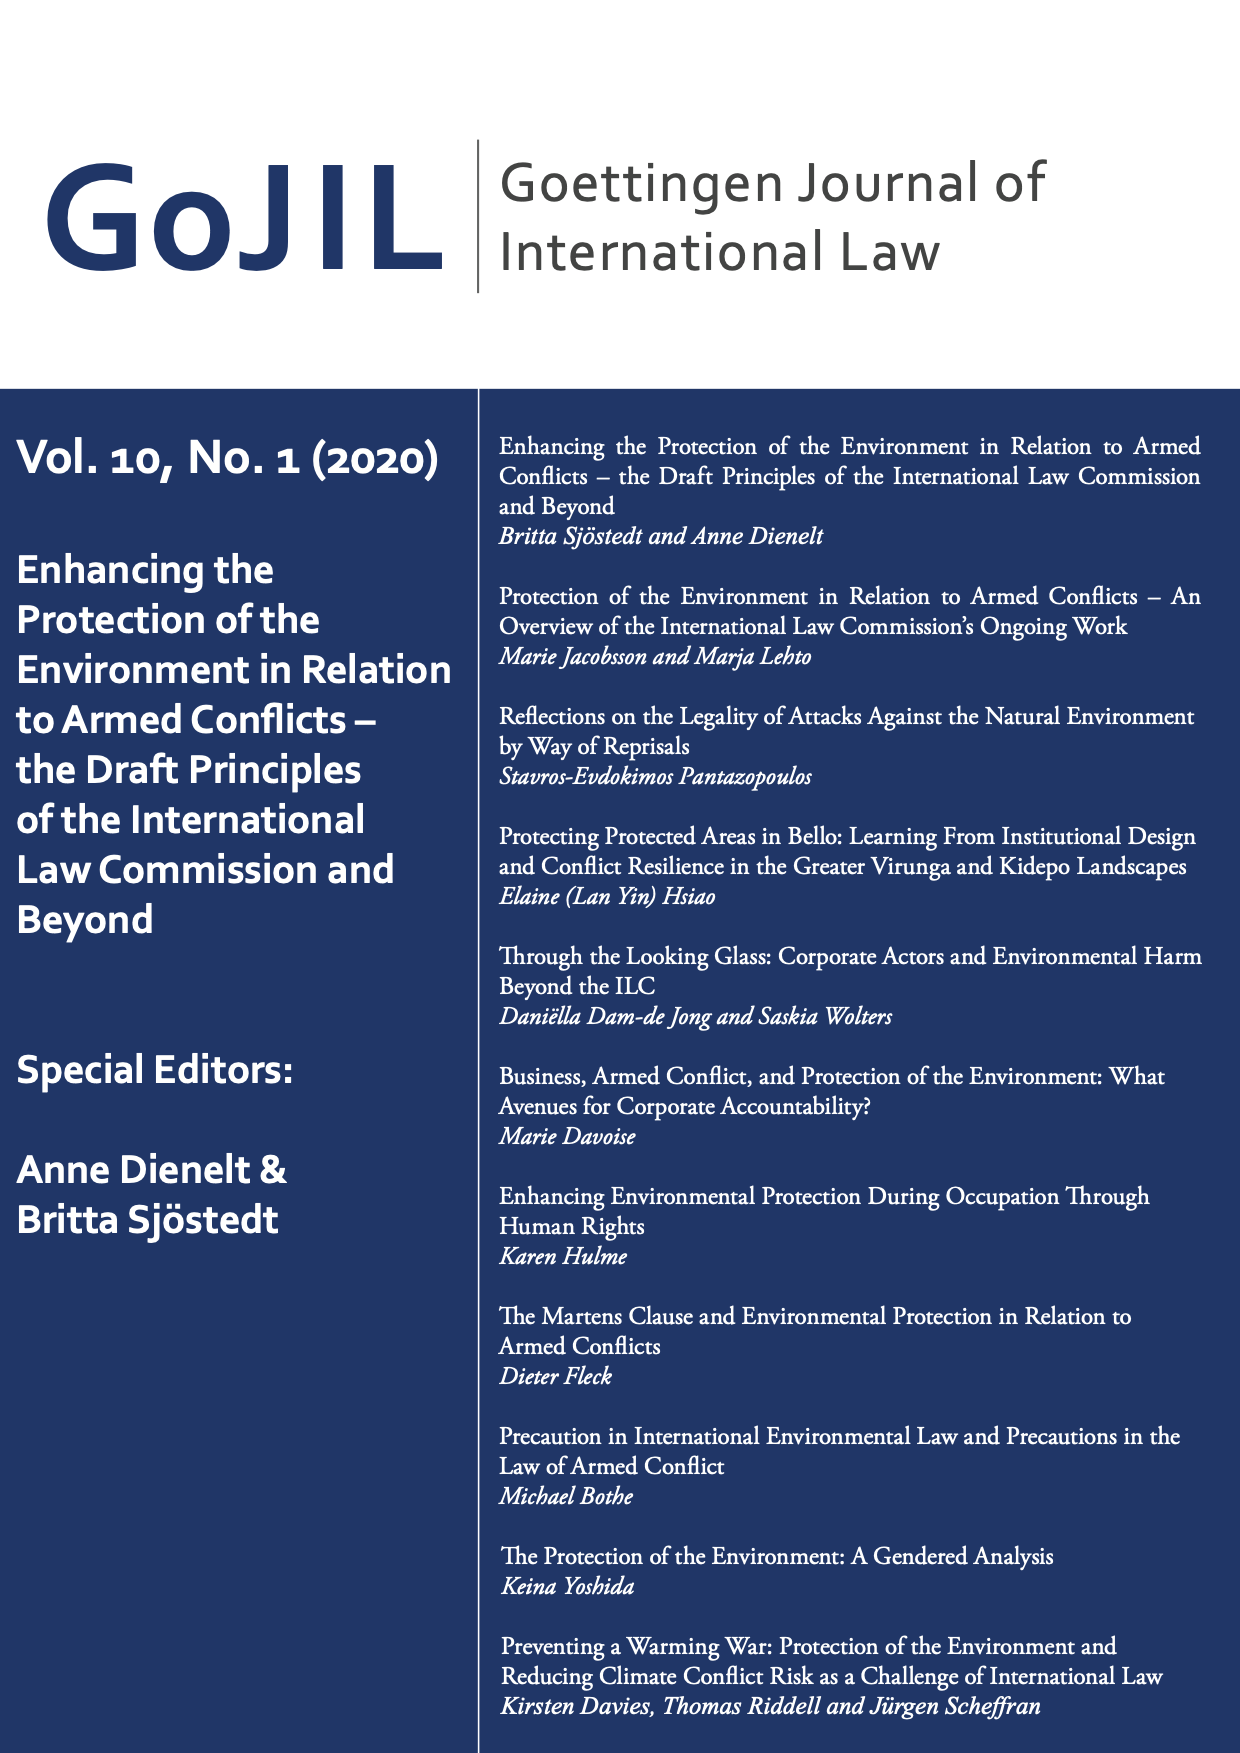 Conflicts in International Environmental Law